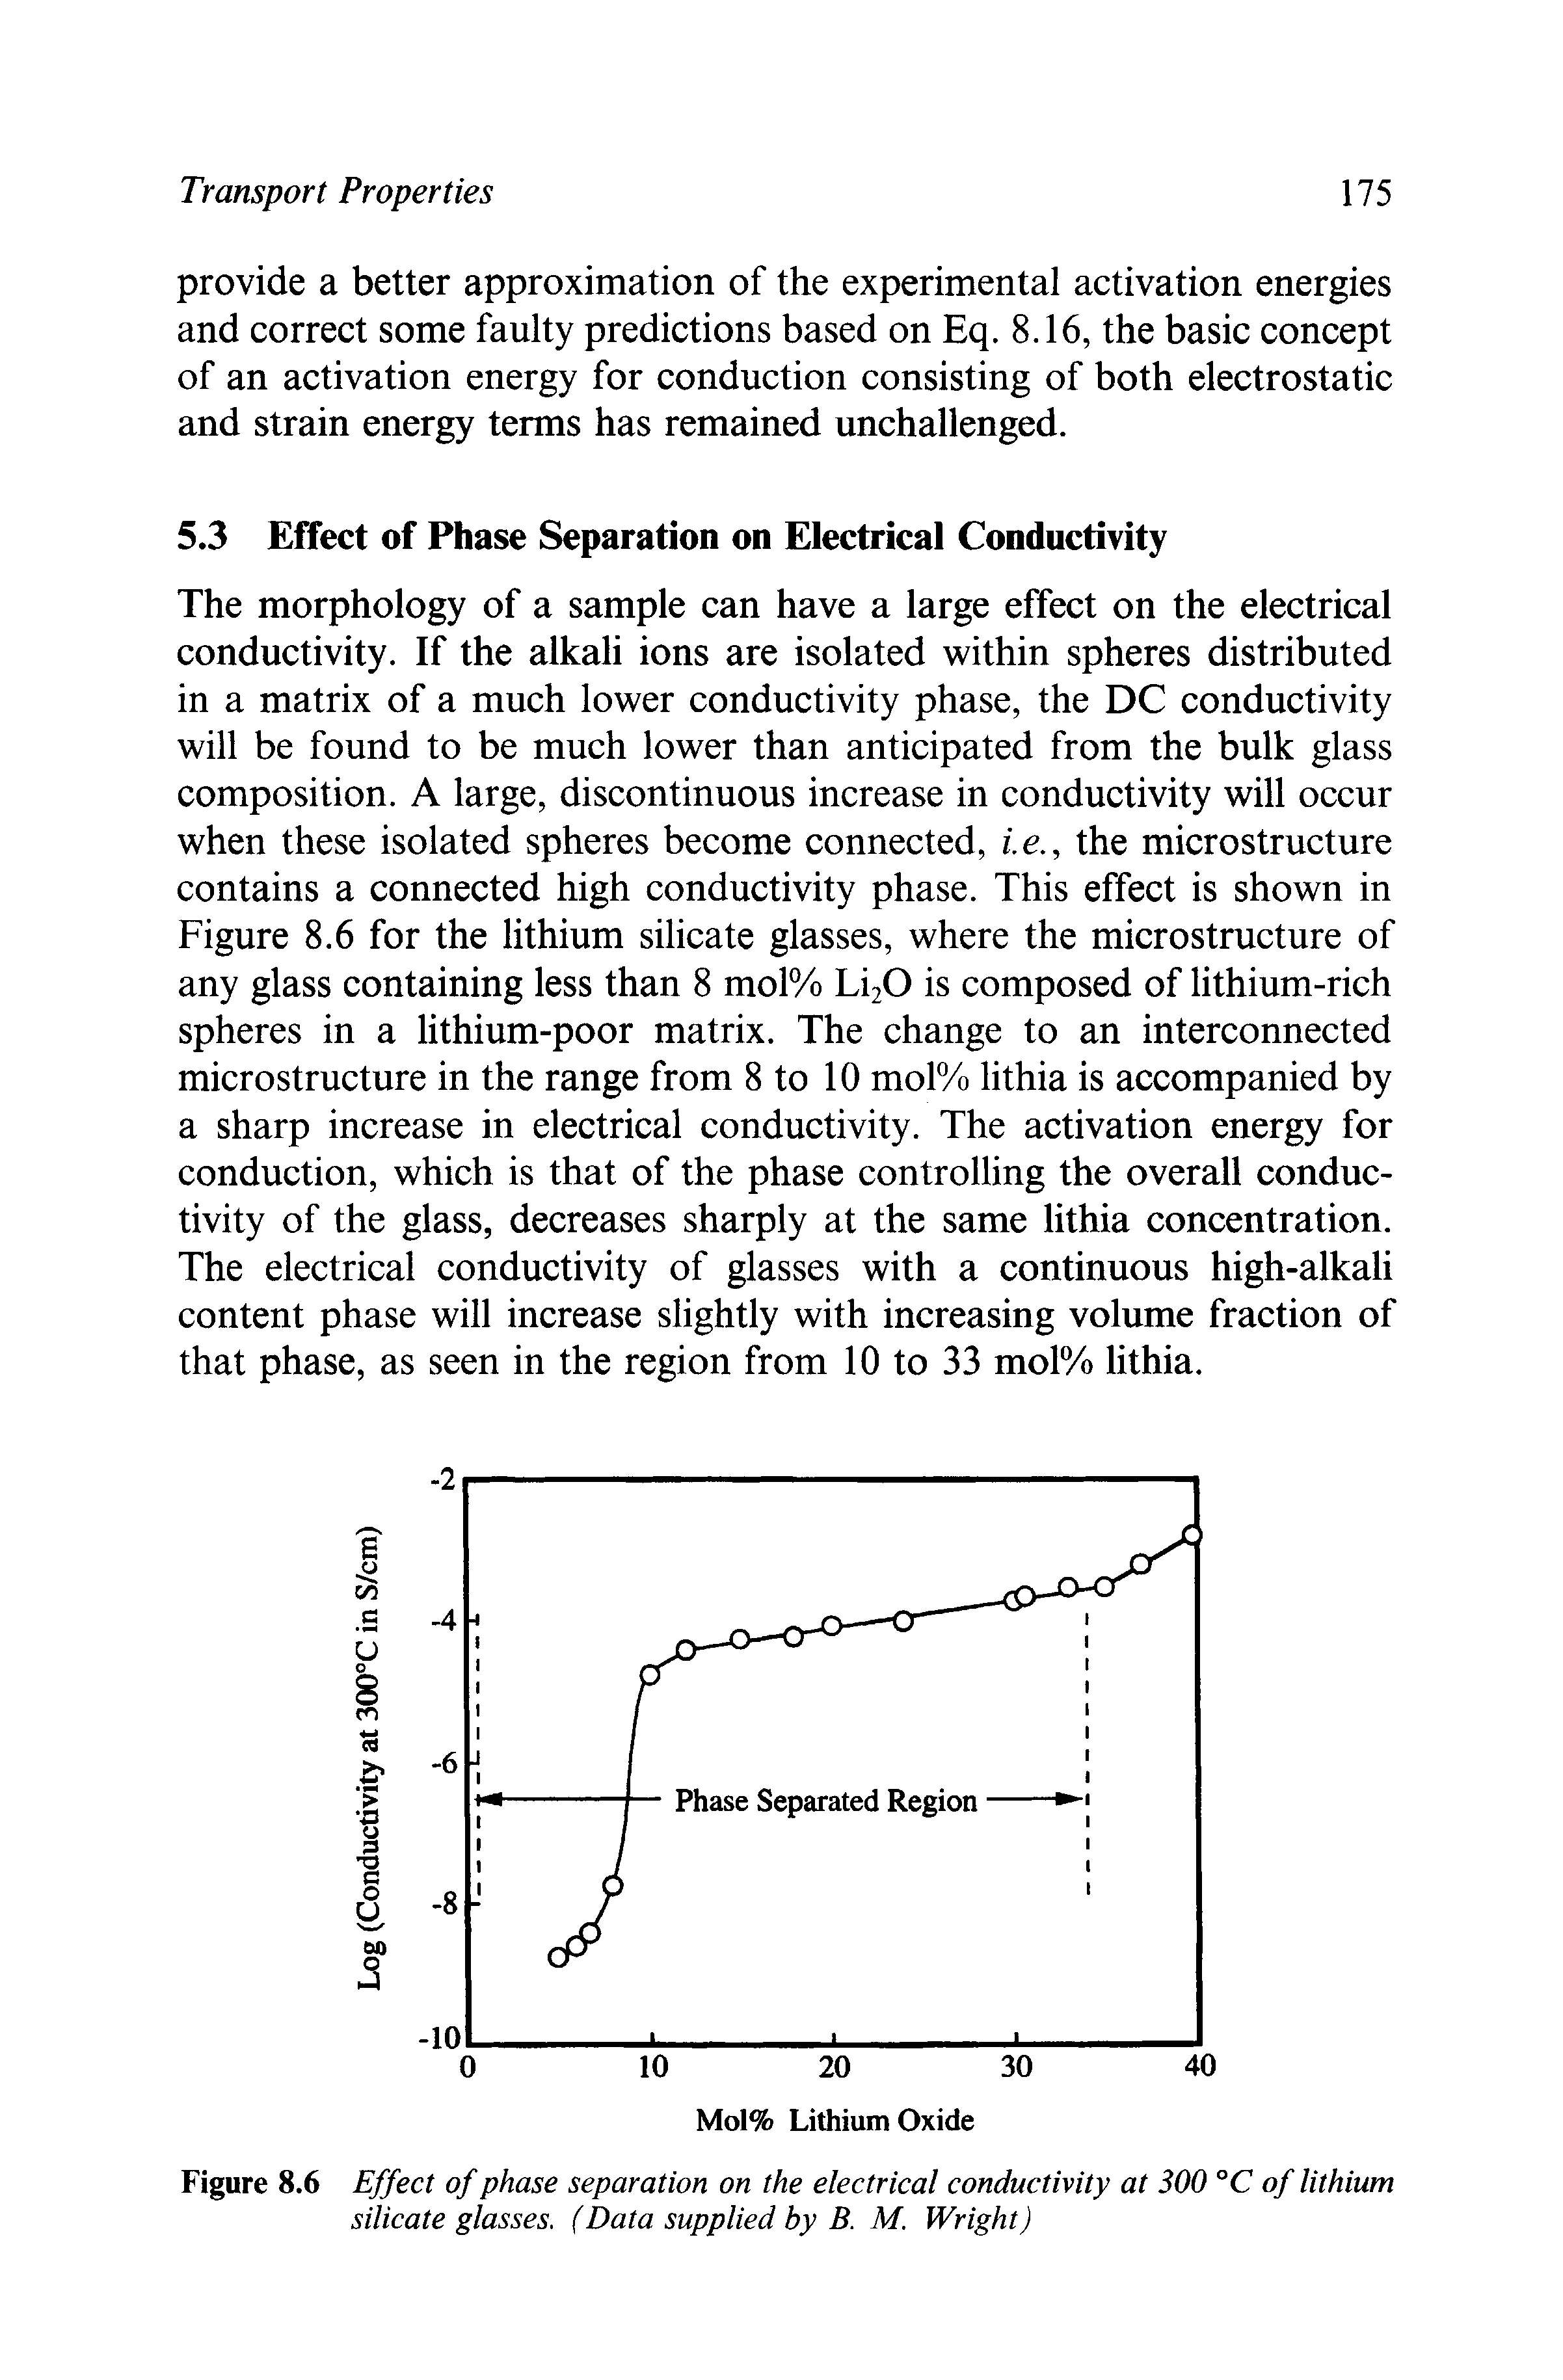 Figure 8.6 Effect of phase separation on the electrical conductivity at 300 °C of lithium silicate glasses. (Data supplied by B. M. Wright)...